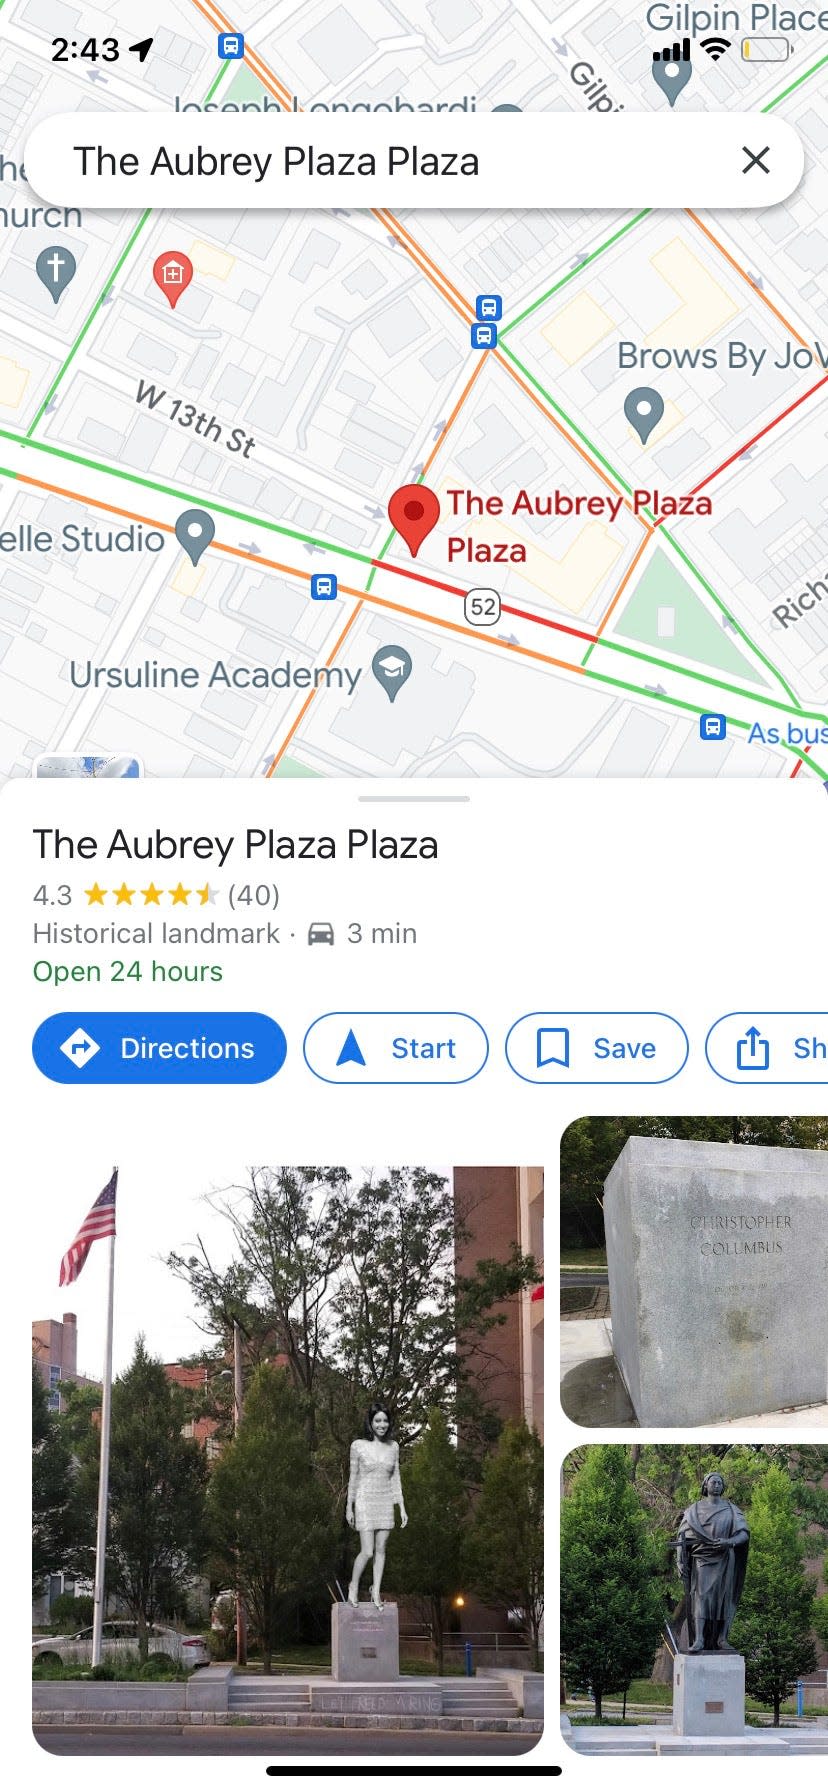 The Aubrey Plaza Plaza in Wilmington may not be real, but it appears on Google Maps.